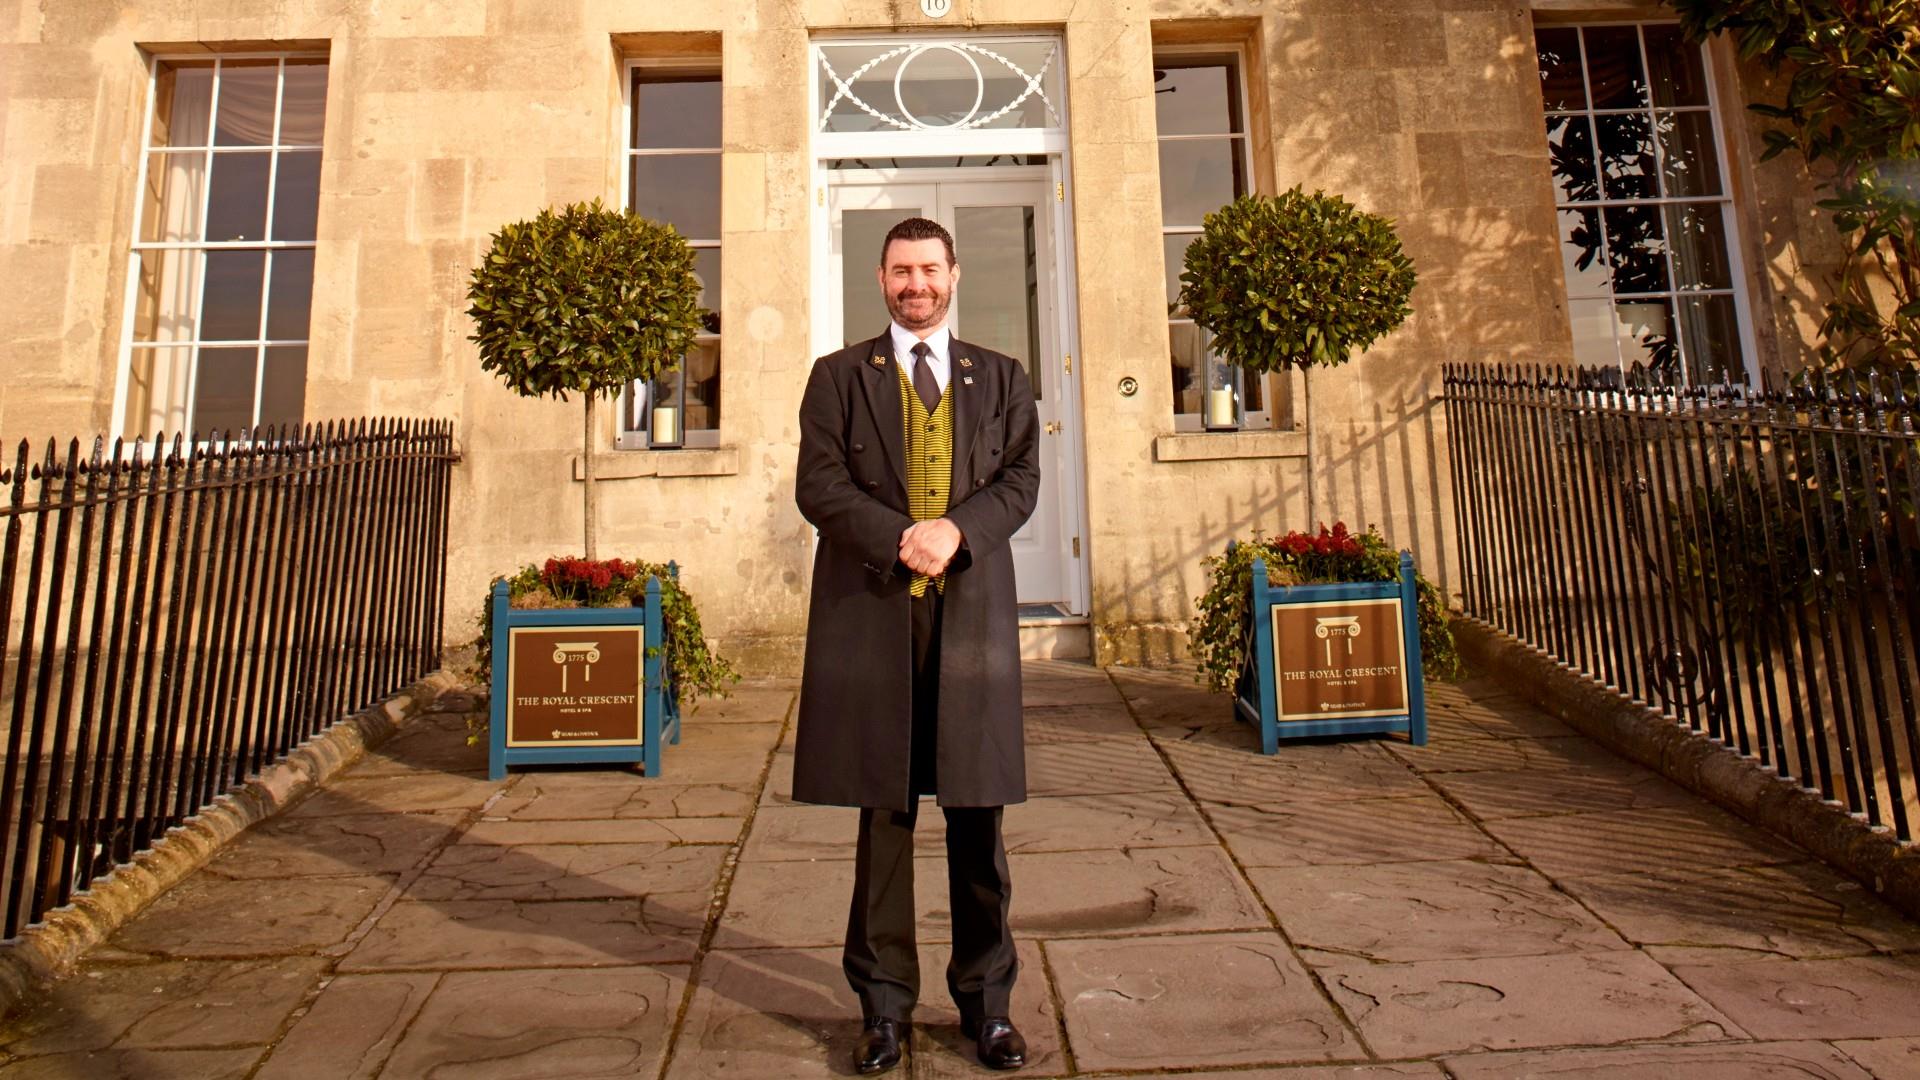 Smiling doorman stands outside The Royal Crescent Hotel & Spa